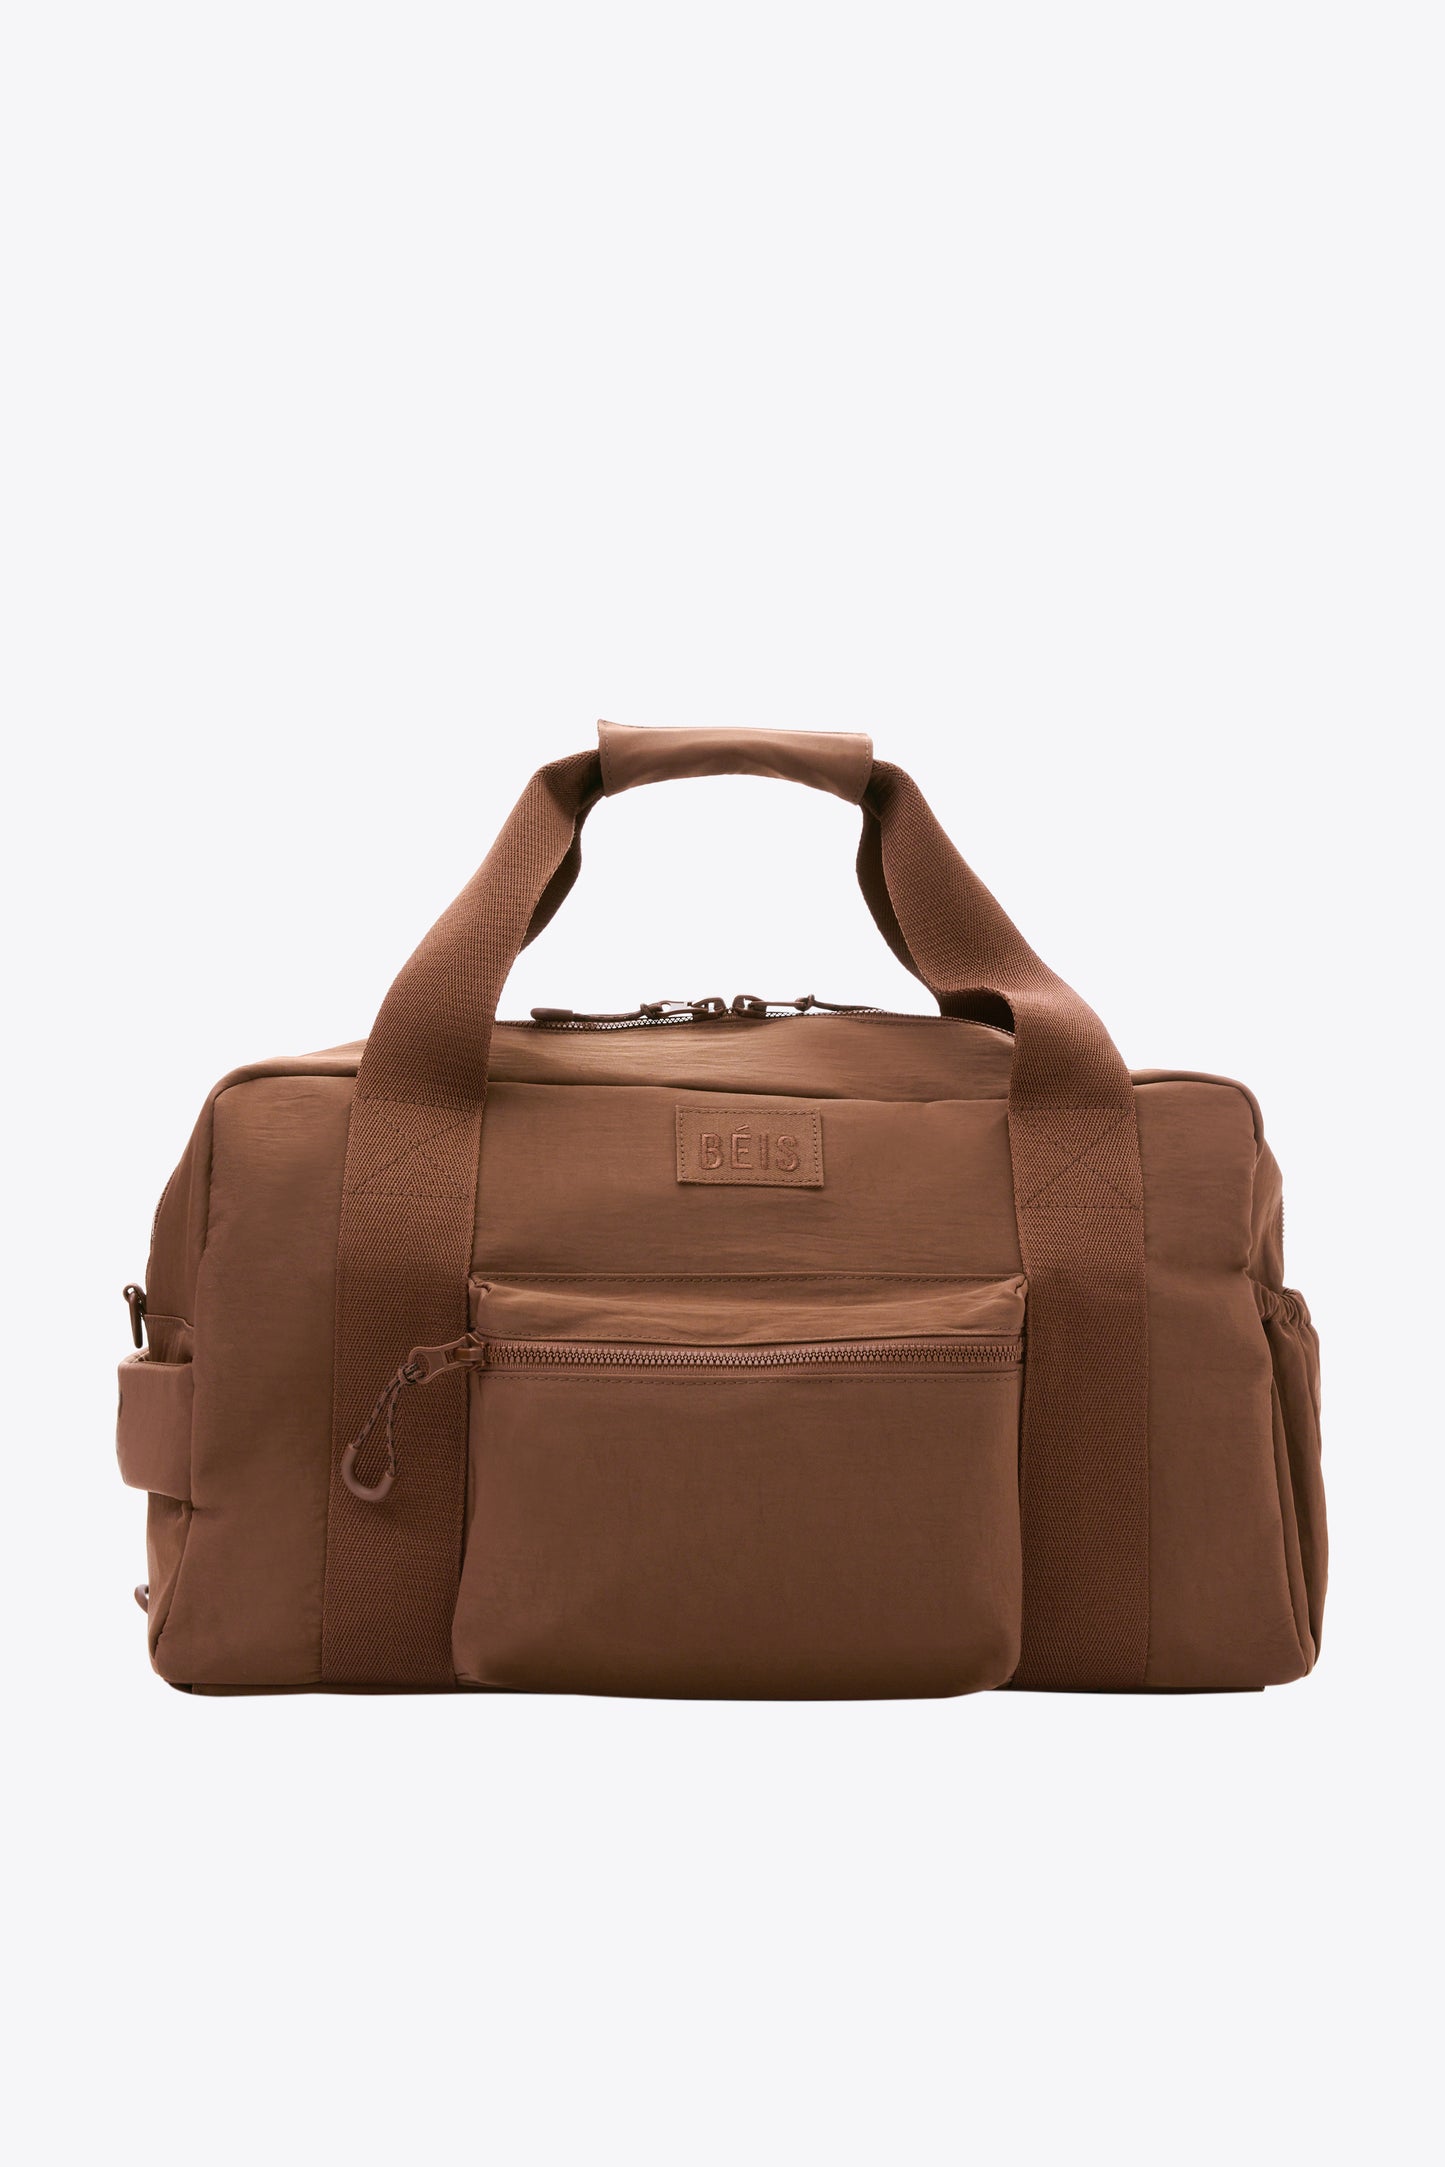 The Sport Duffle in Maple